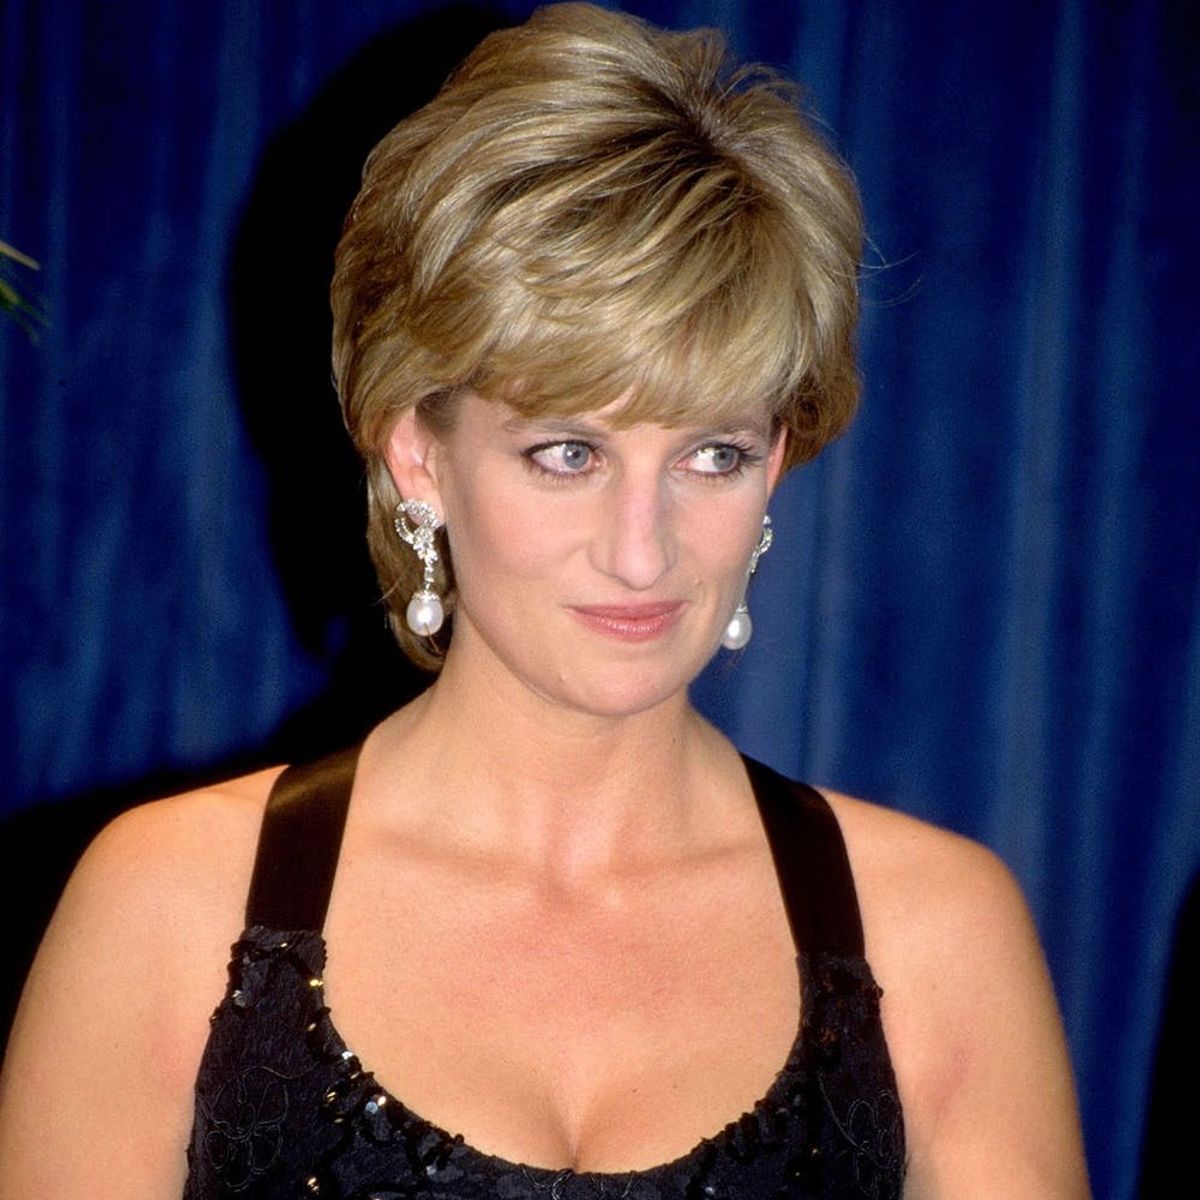 Here’s Why Princess Diana Always Carried a Clutch